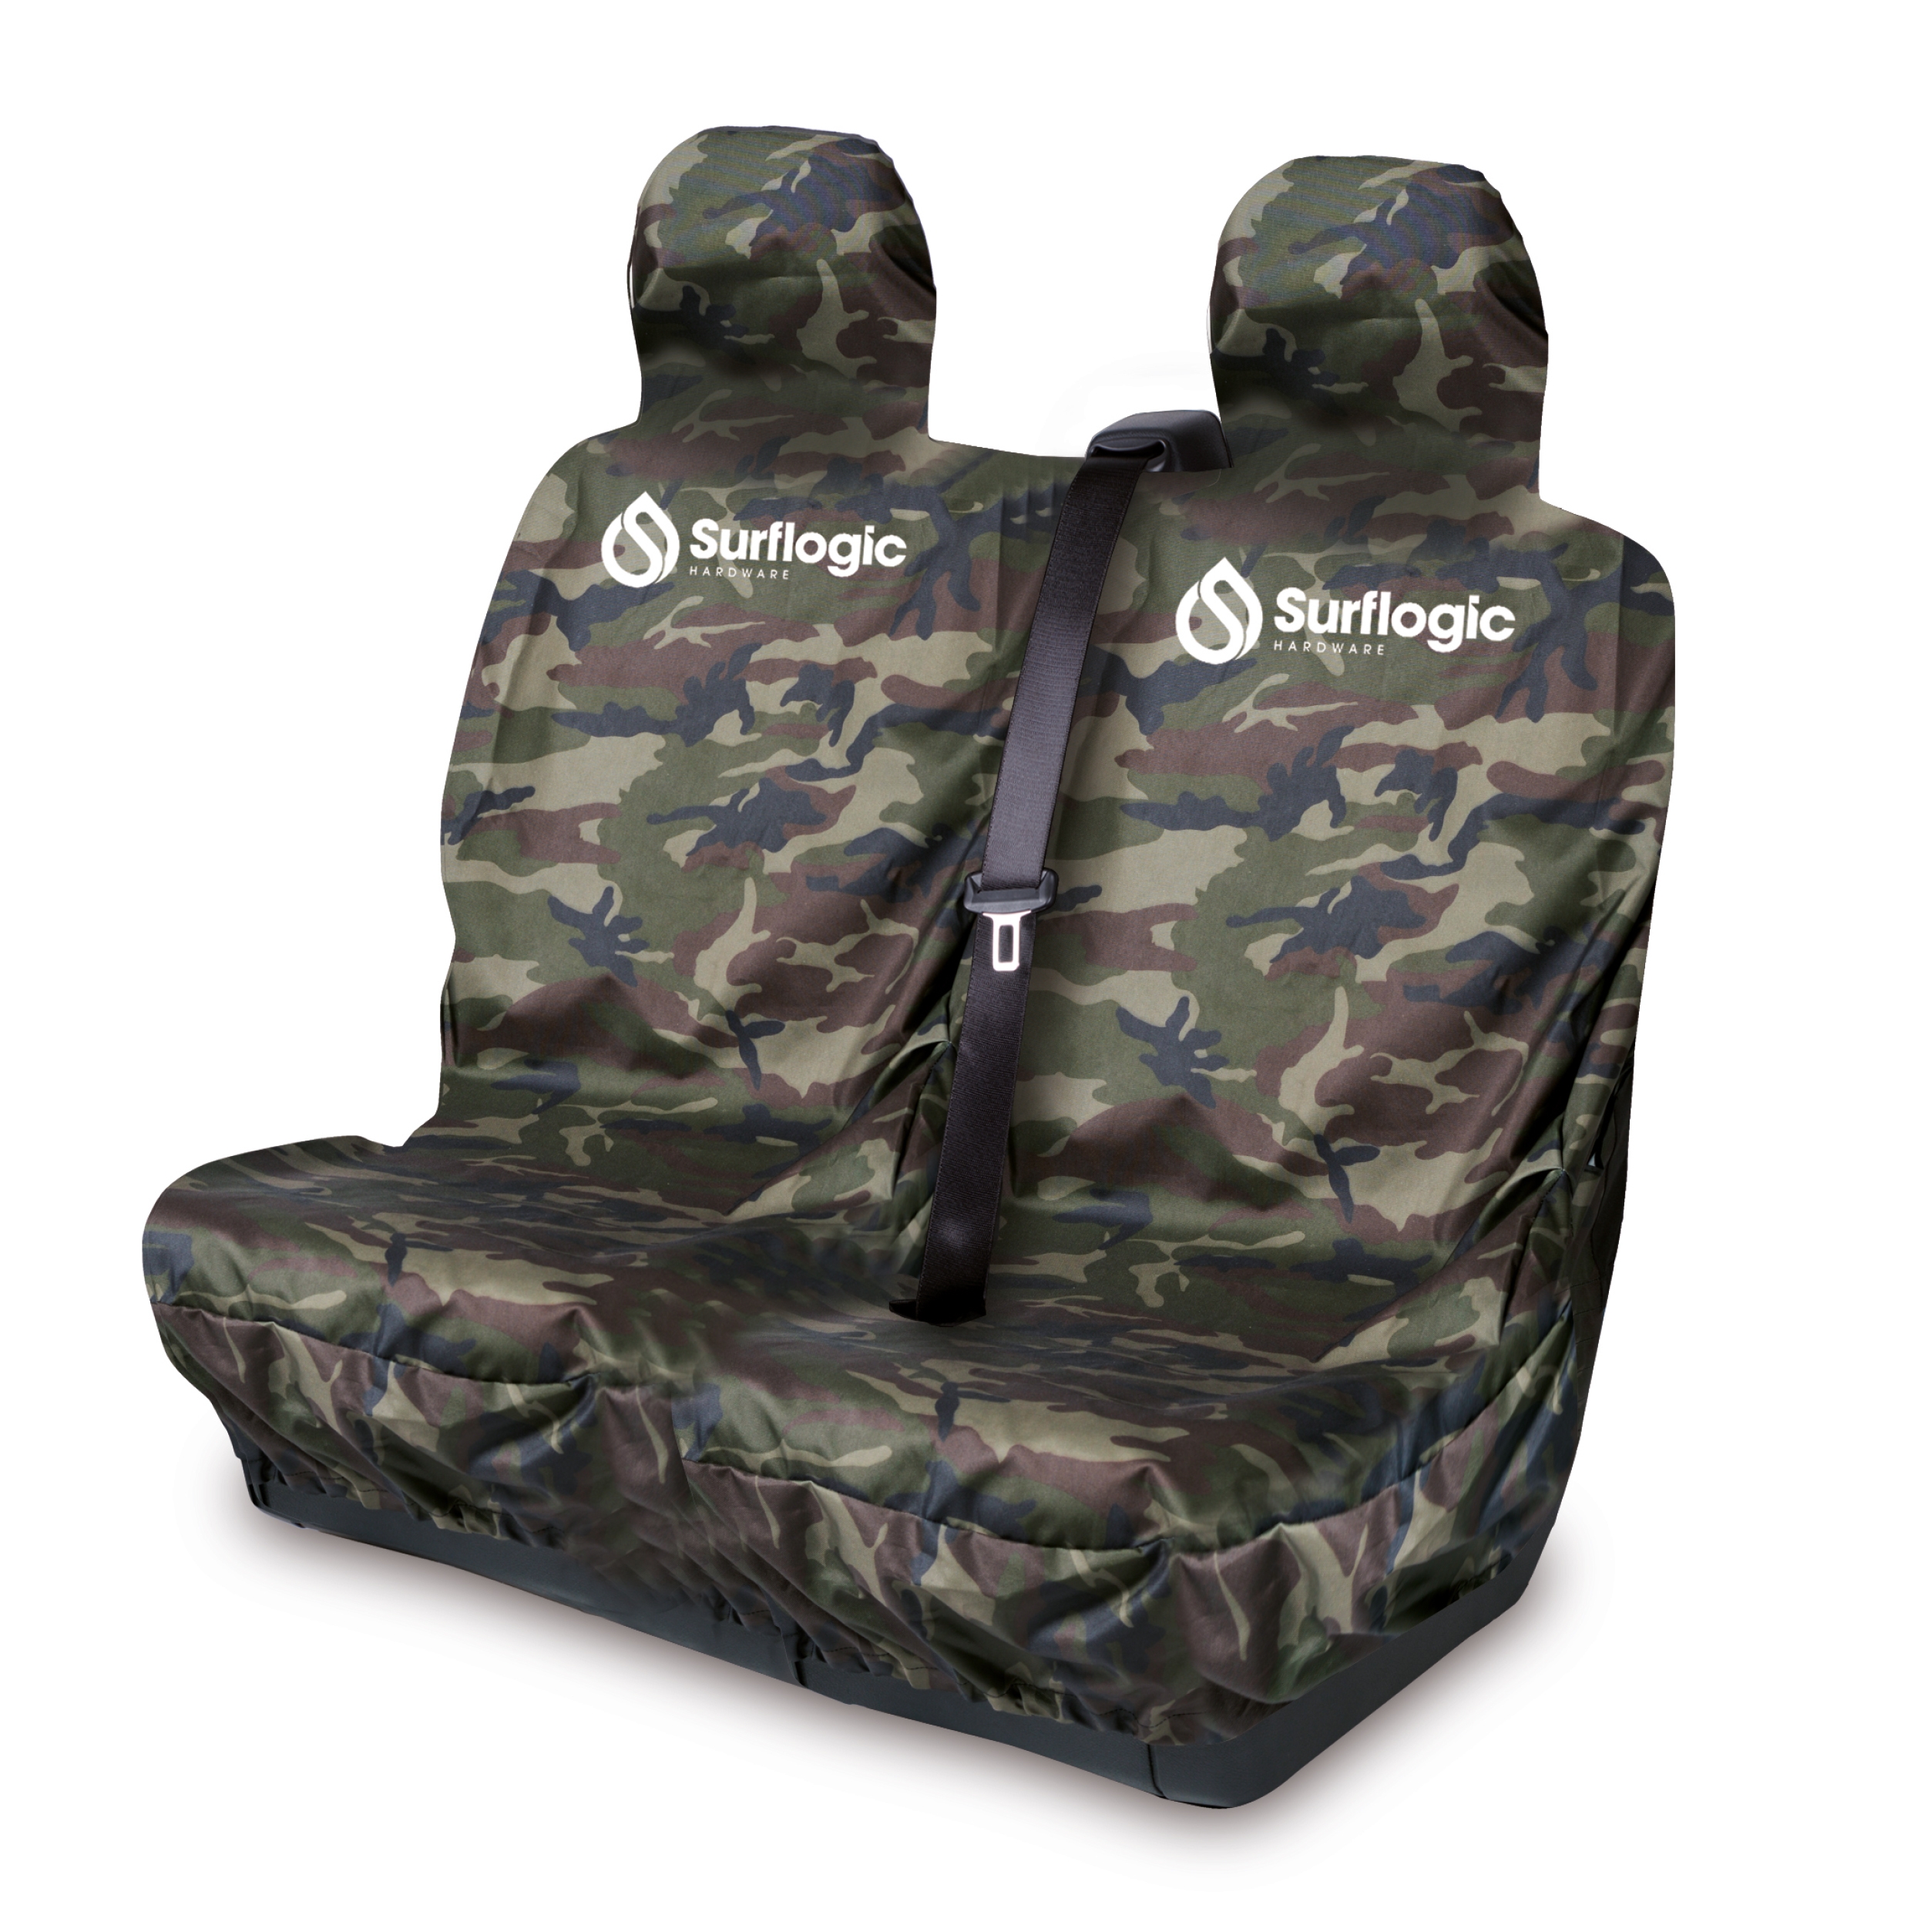 Surf Logic Waterproof Car Seat Cover Double – Camo – The Foiling Collective